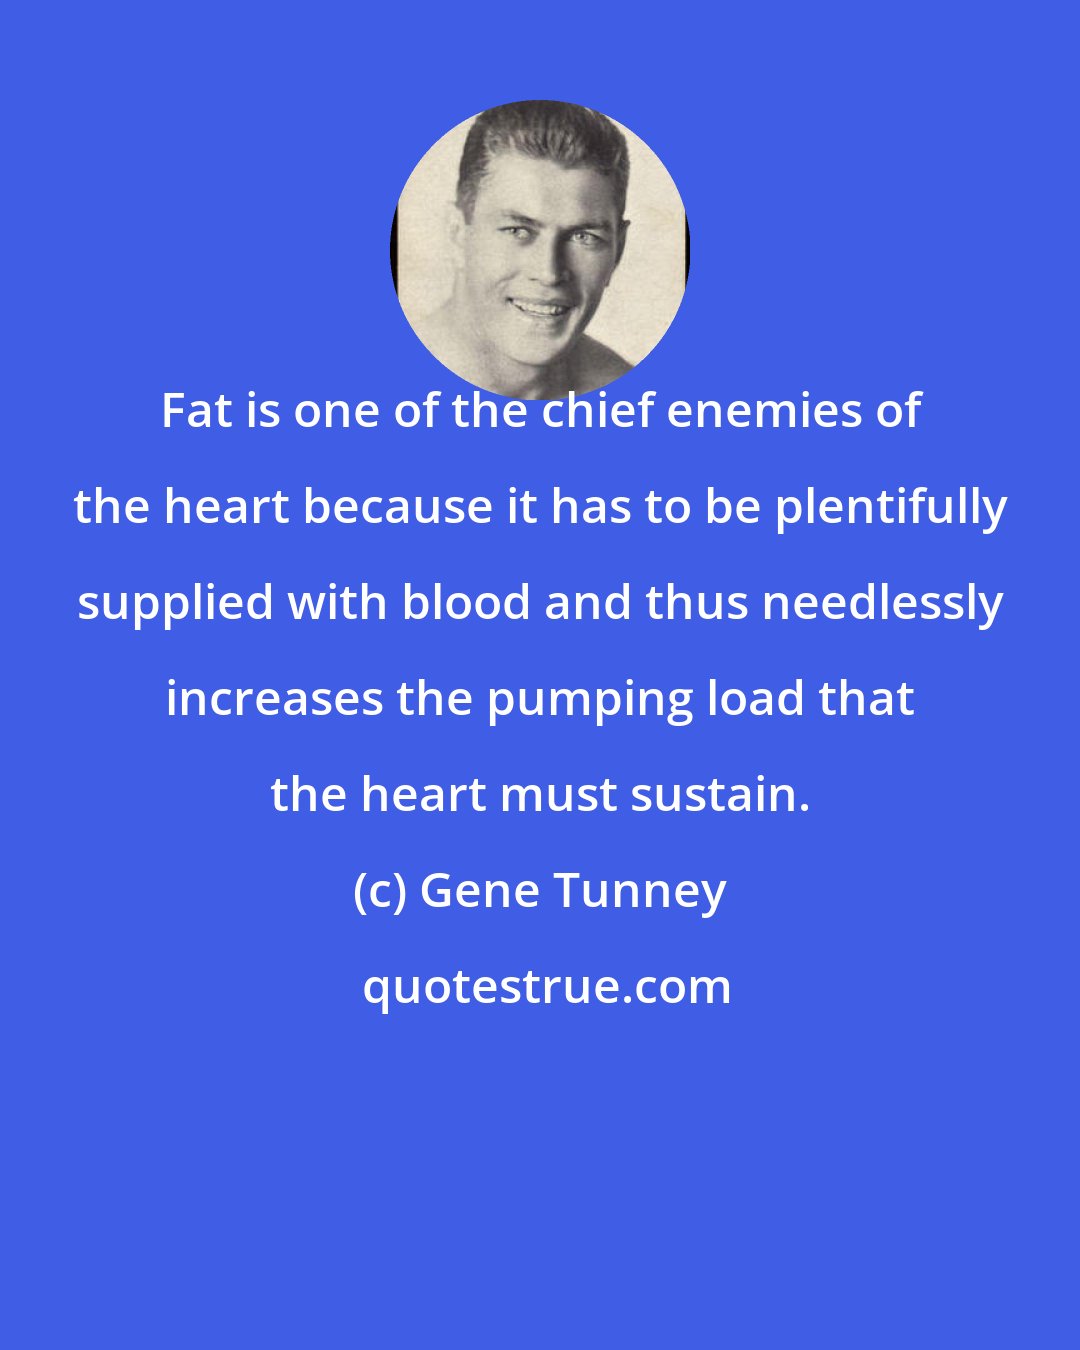 Gene Tunney: Fat is one of the chief enemies of the heart because it has to be plentifully supplied with blood and thus needlessly increases the pumping load that the heart must sustain.